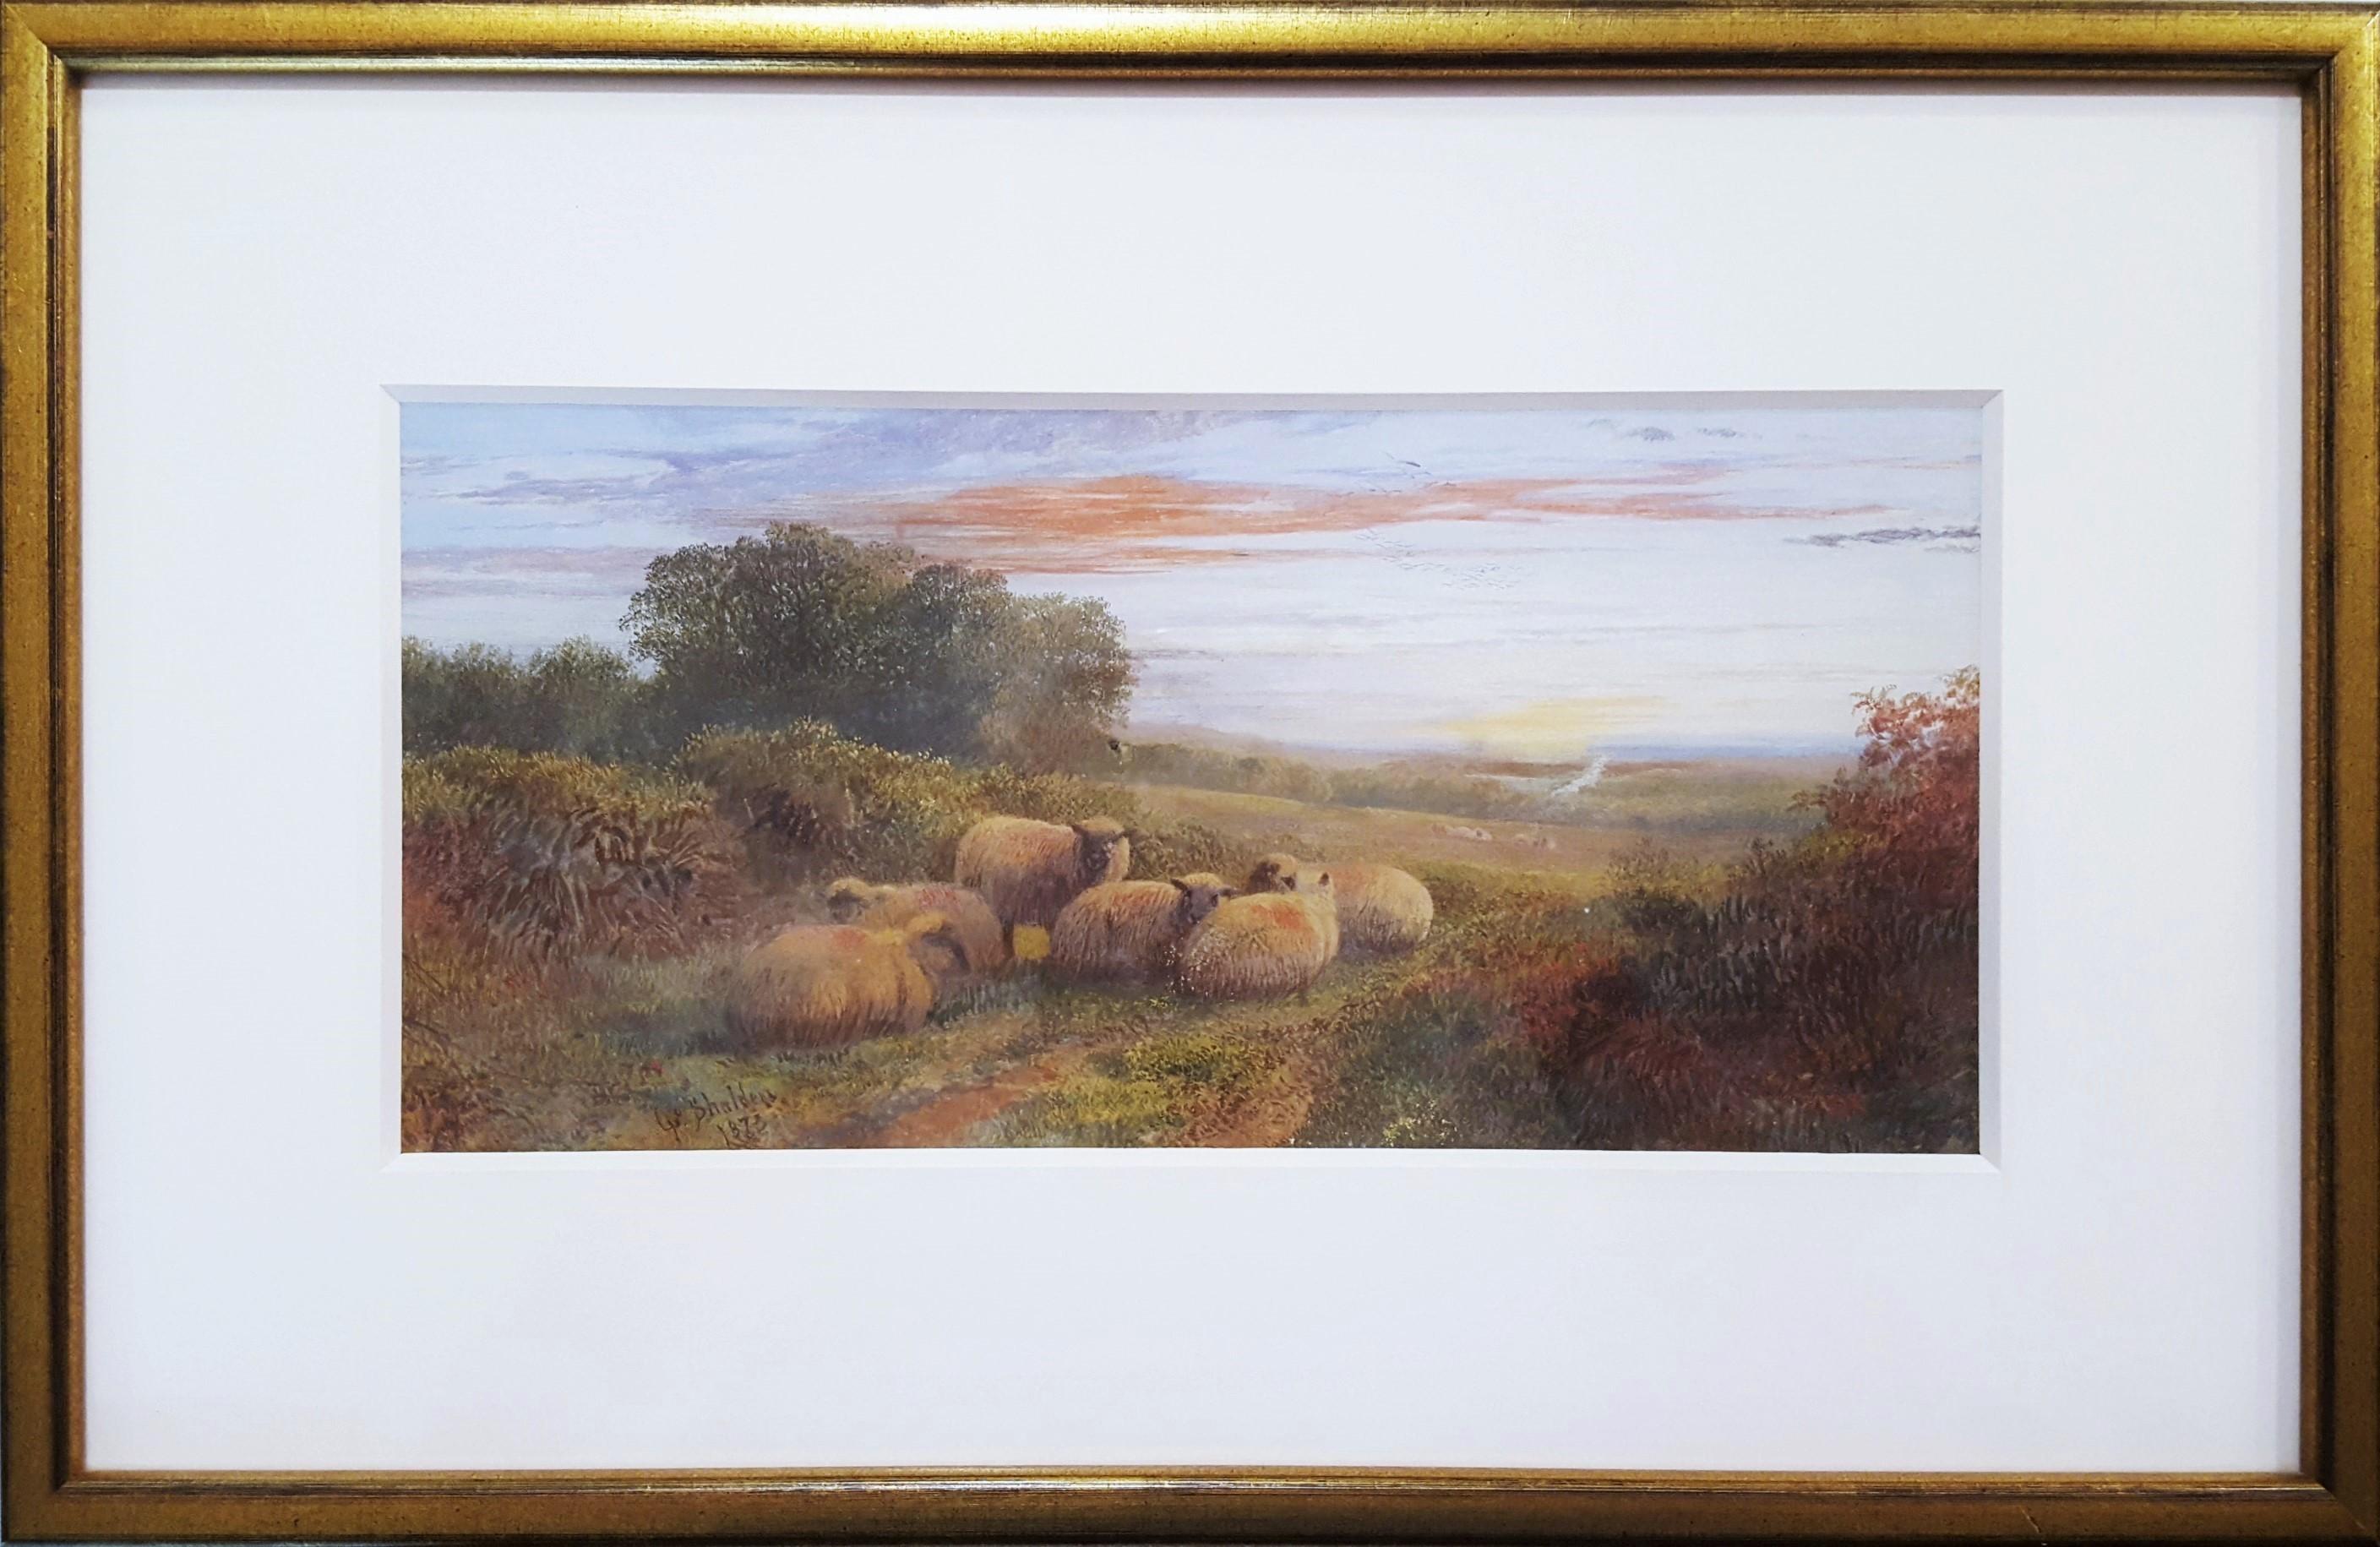 Sheep in Landscape at Dusk - Painting by George Shalders